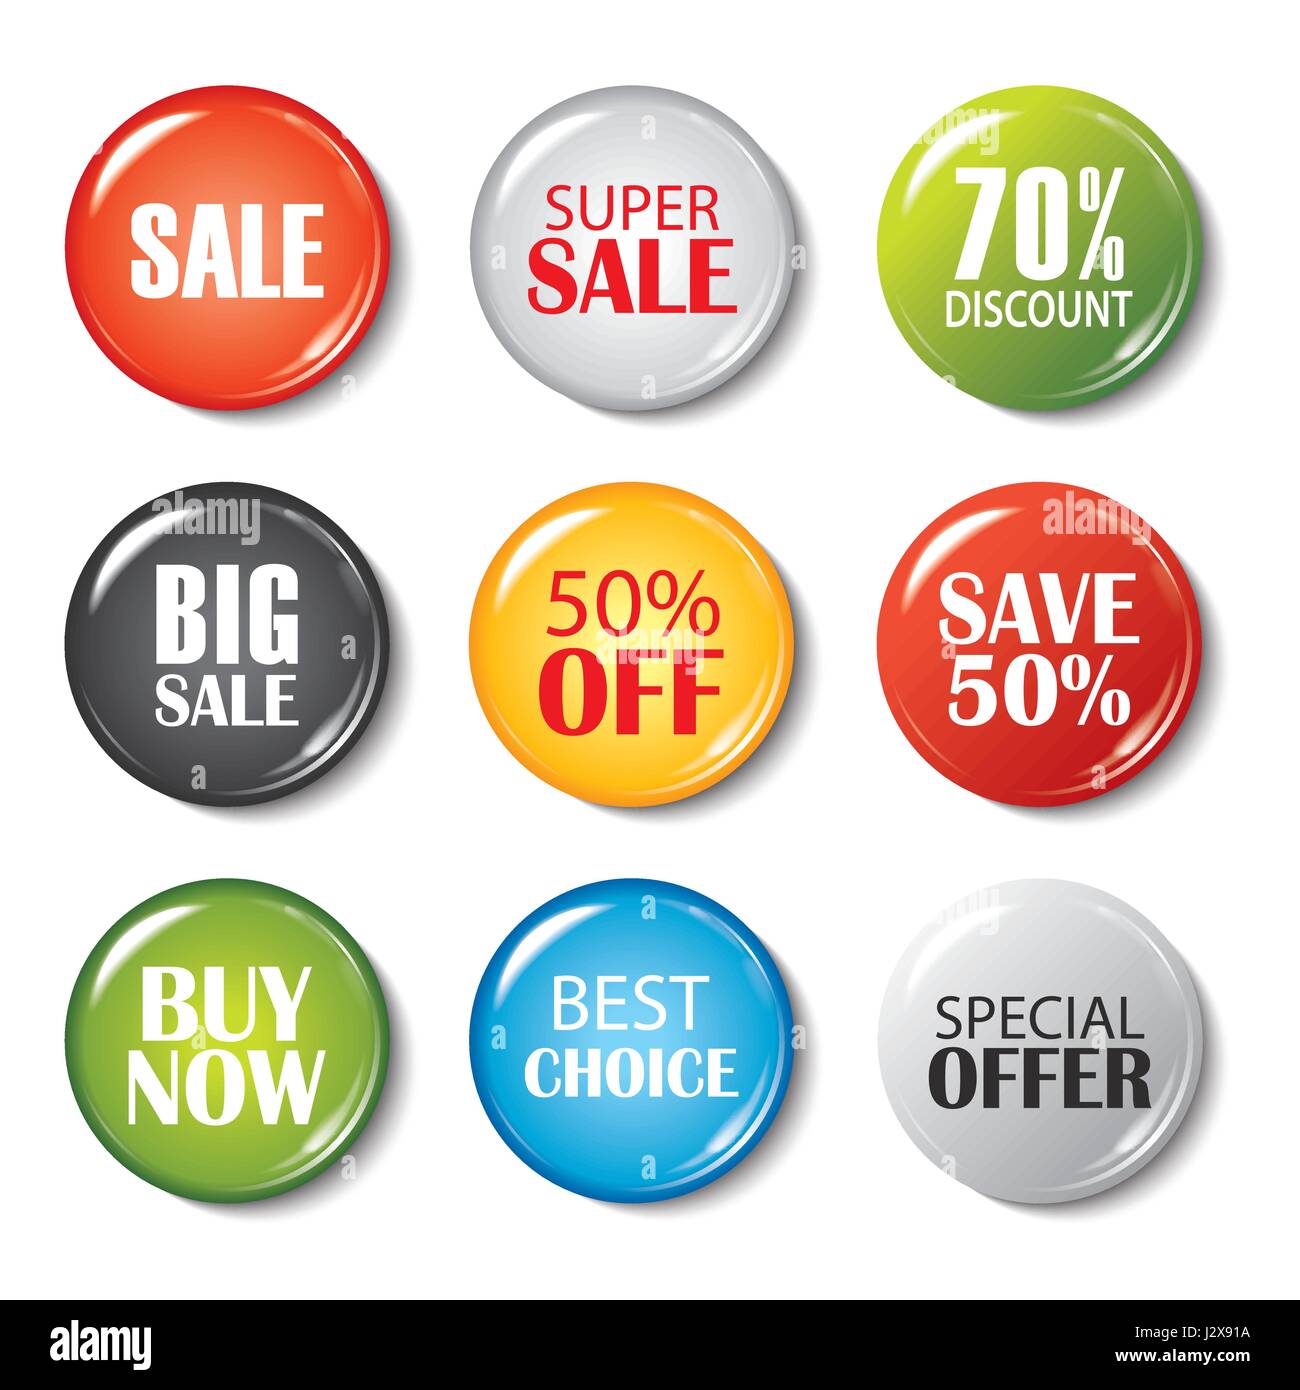 Set Of Sale Buttons And Badges Product Promotions Big Sale Special